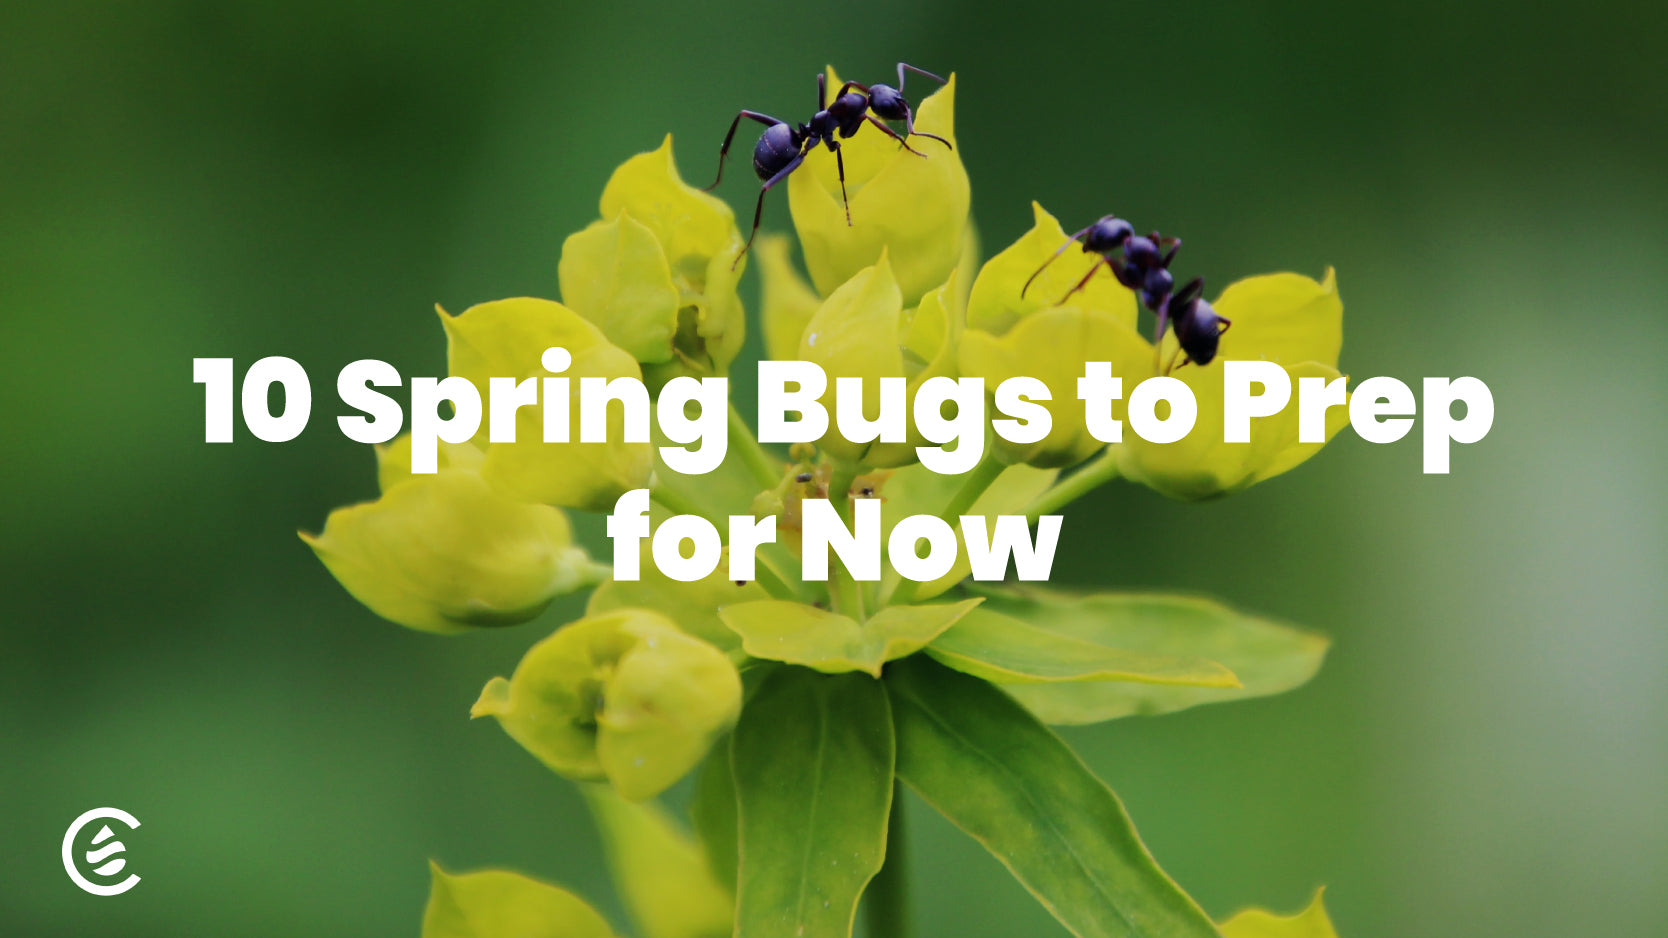 10 Spring Bugs to Prep for Now,  Ants on spring flowers